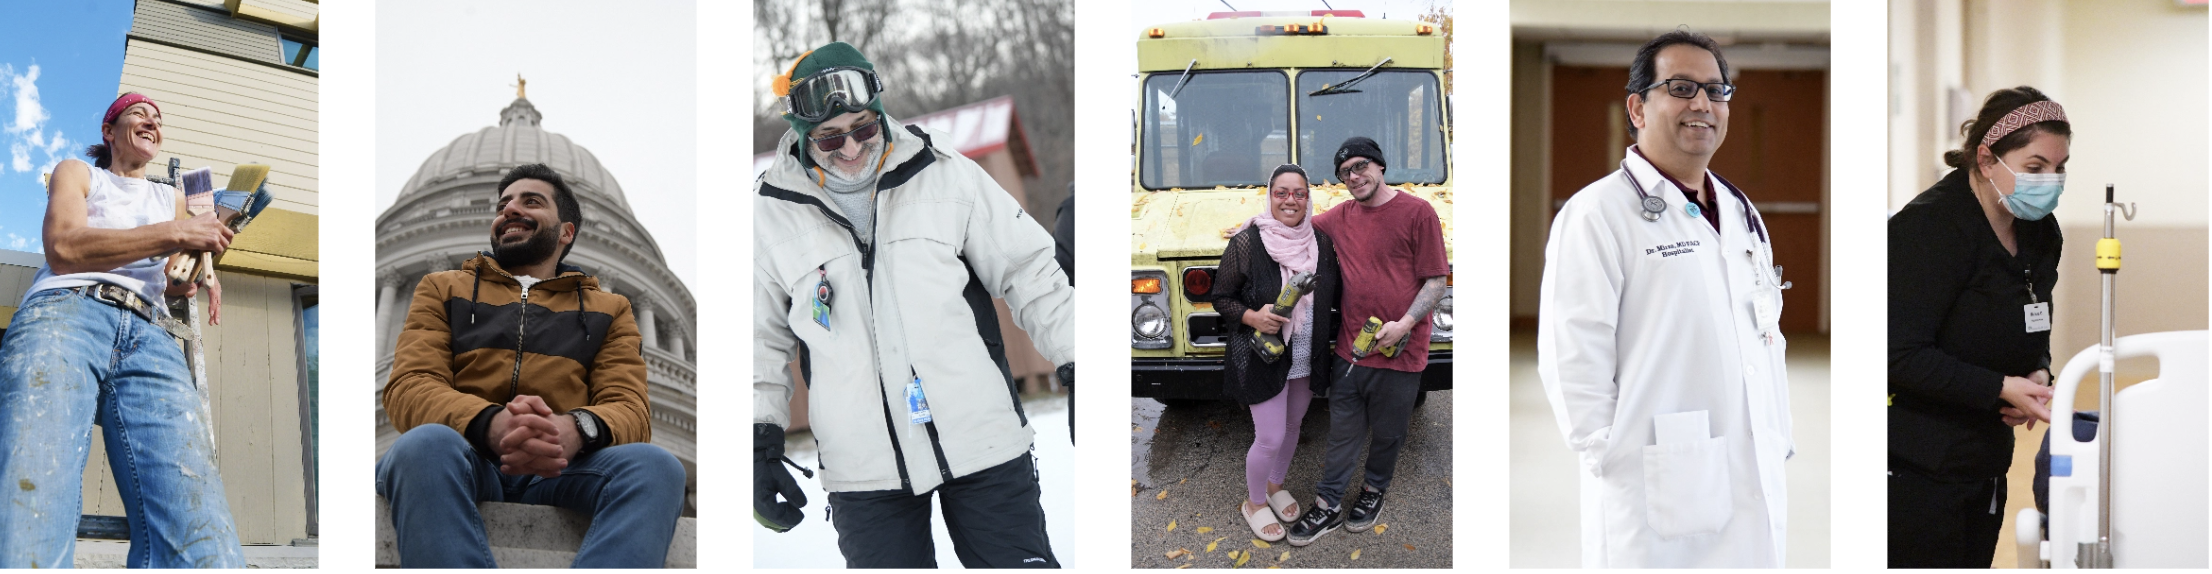 Collage of images showing Wisconsin Muslims doing everyday activities.